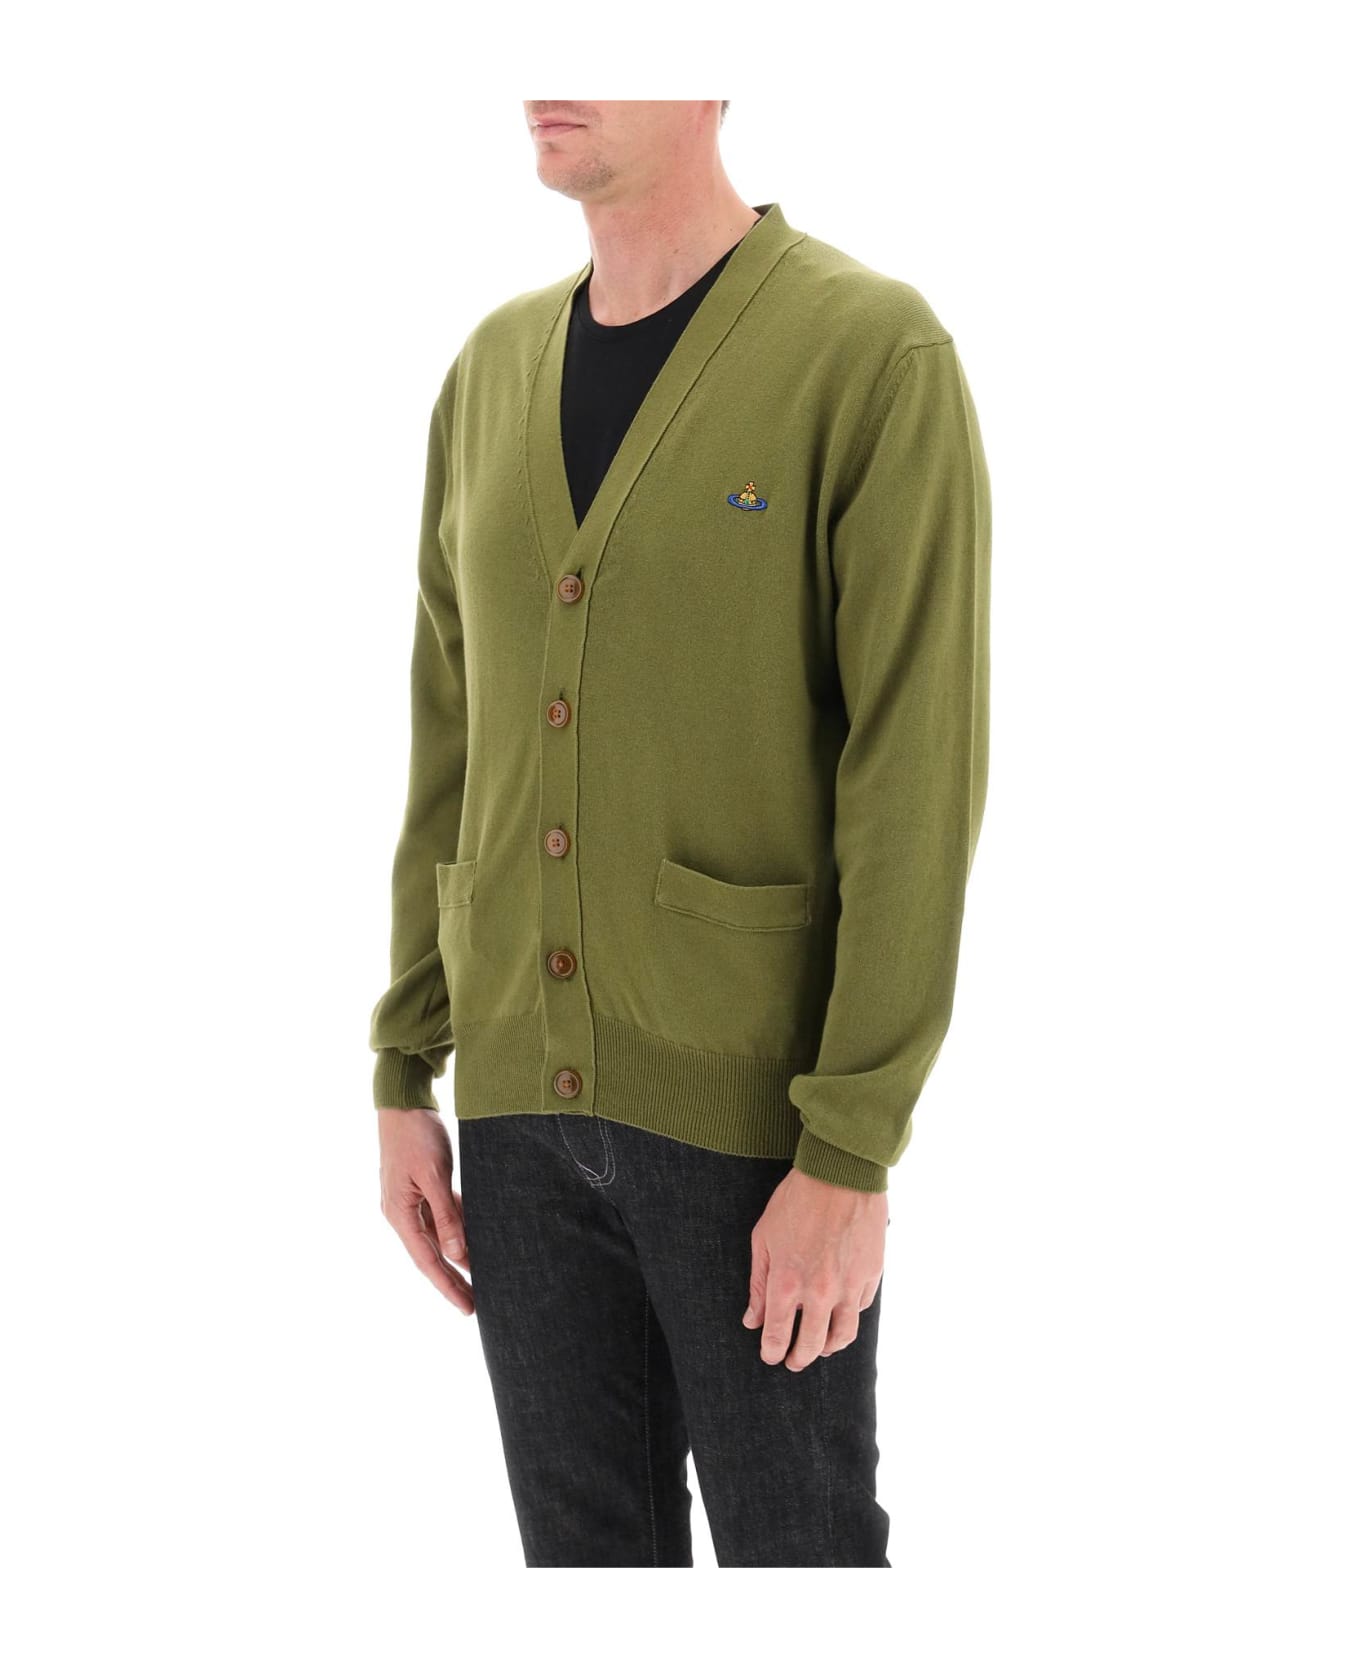 Vivienne Westwood Cardigan With Orb Embroidery - SAGE (Green)